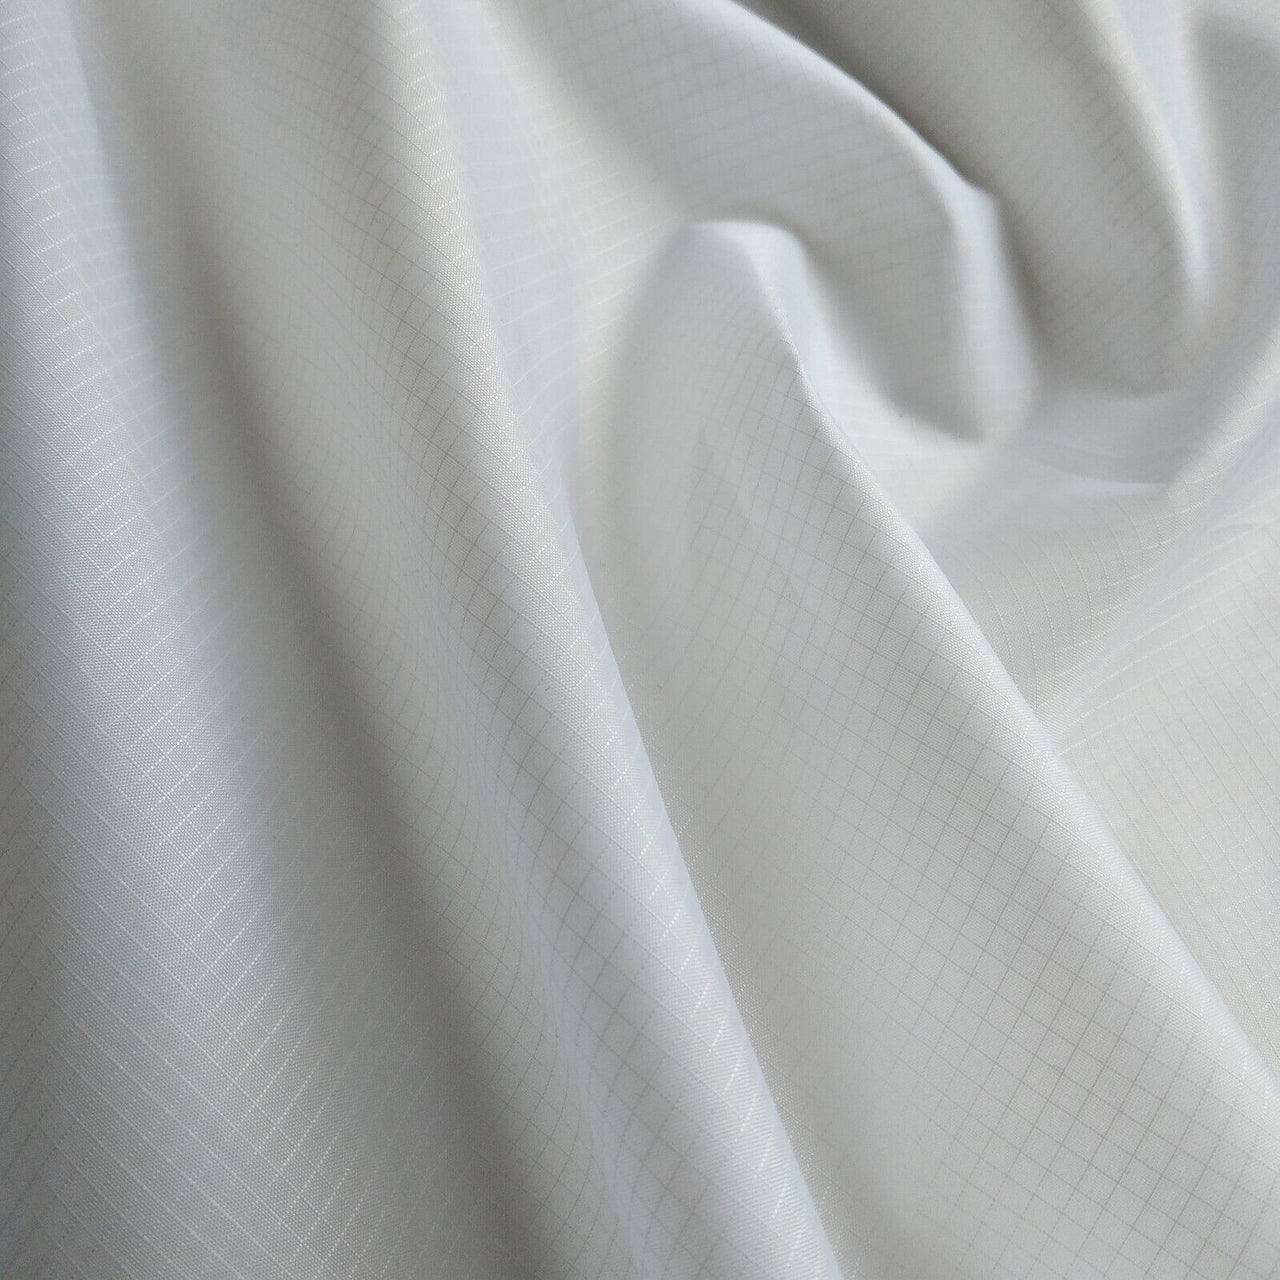 Sublimation Fabric - RipStop - 100% Polyester based Prepared for Print Fabric